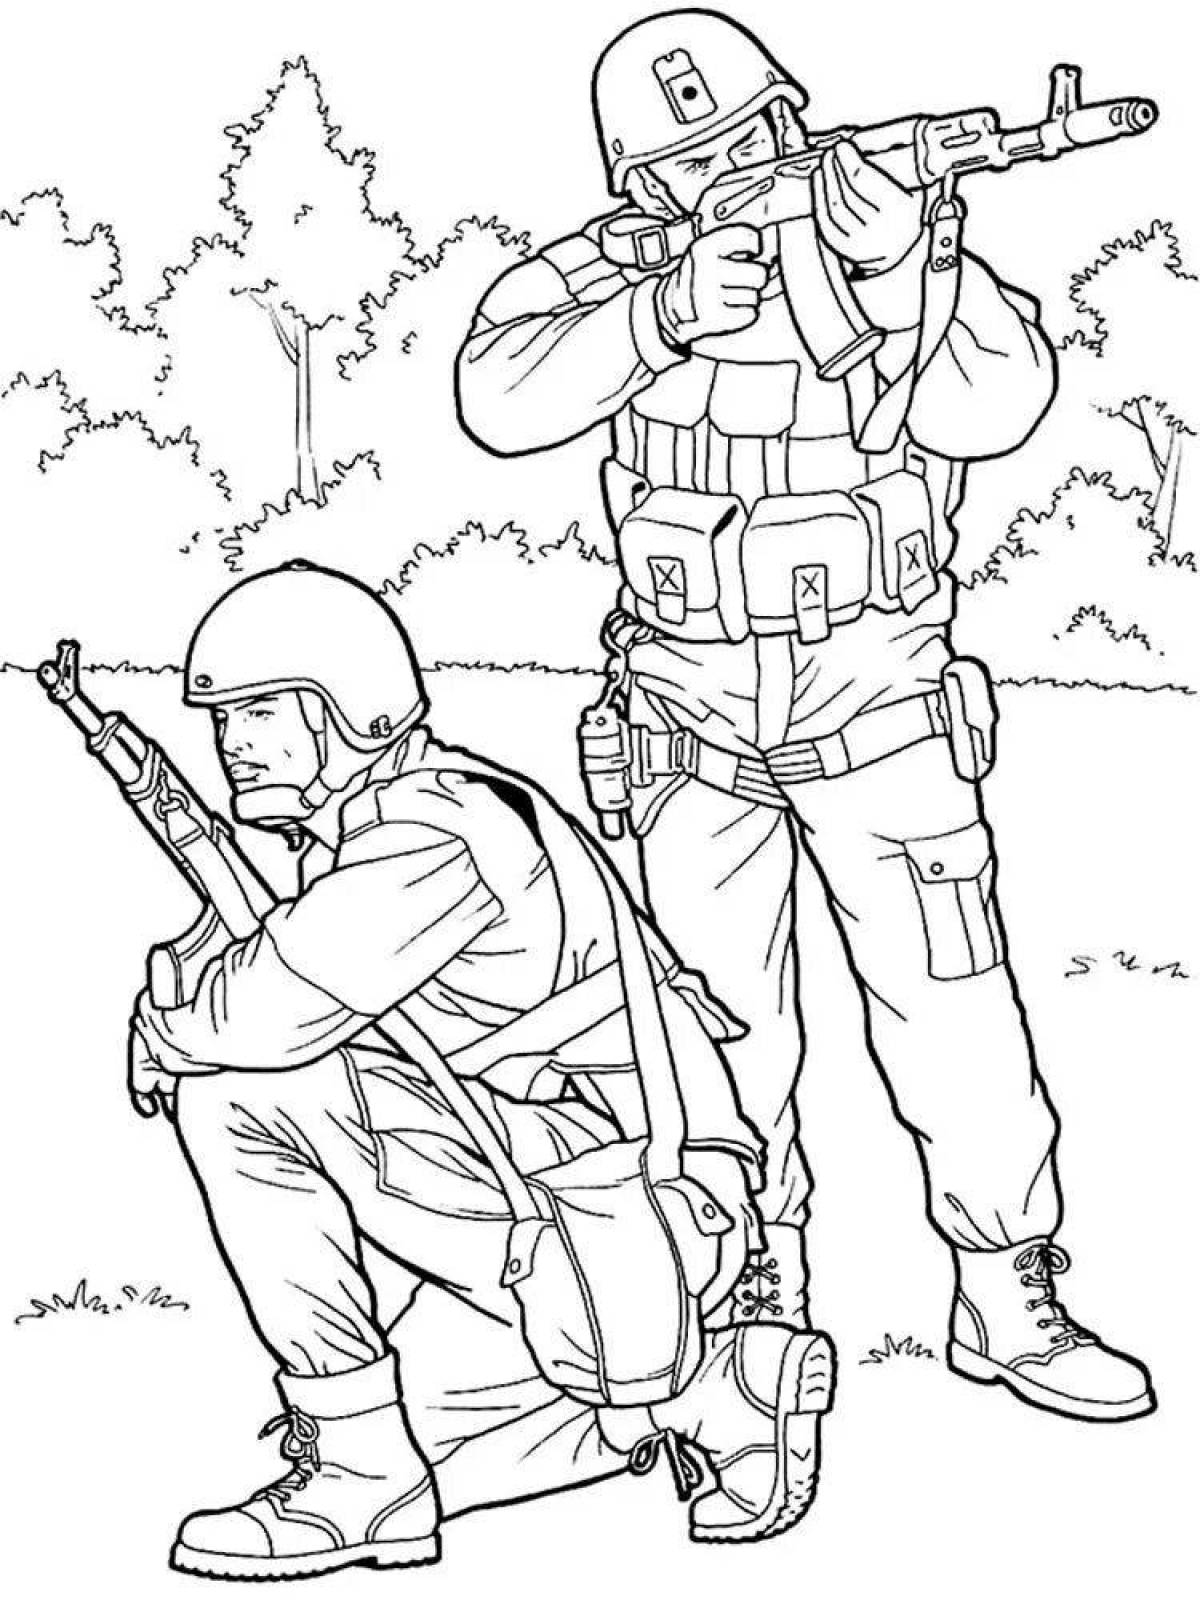 Decisive military soldiers coloring pages for boys